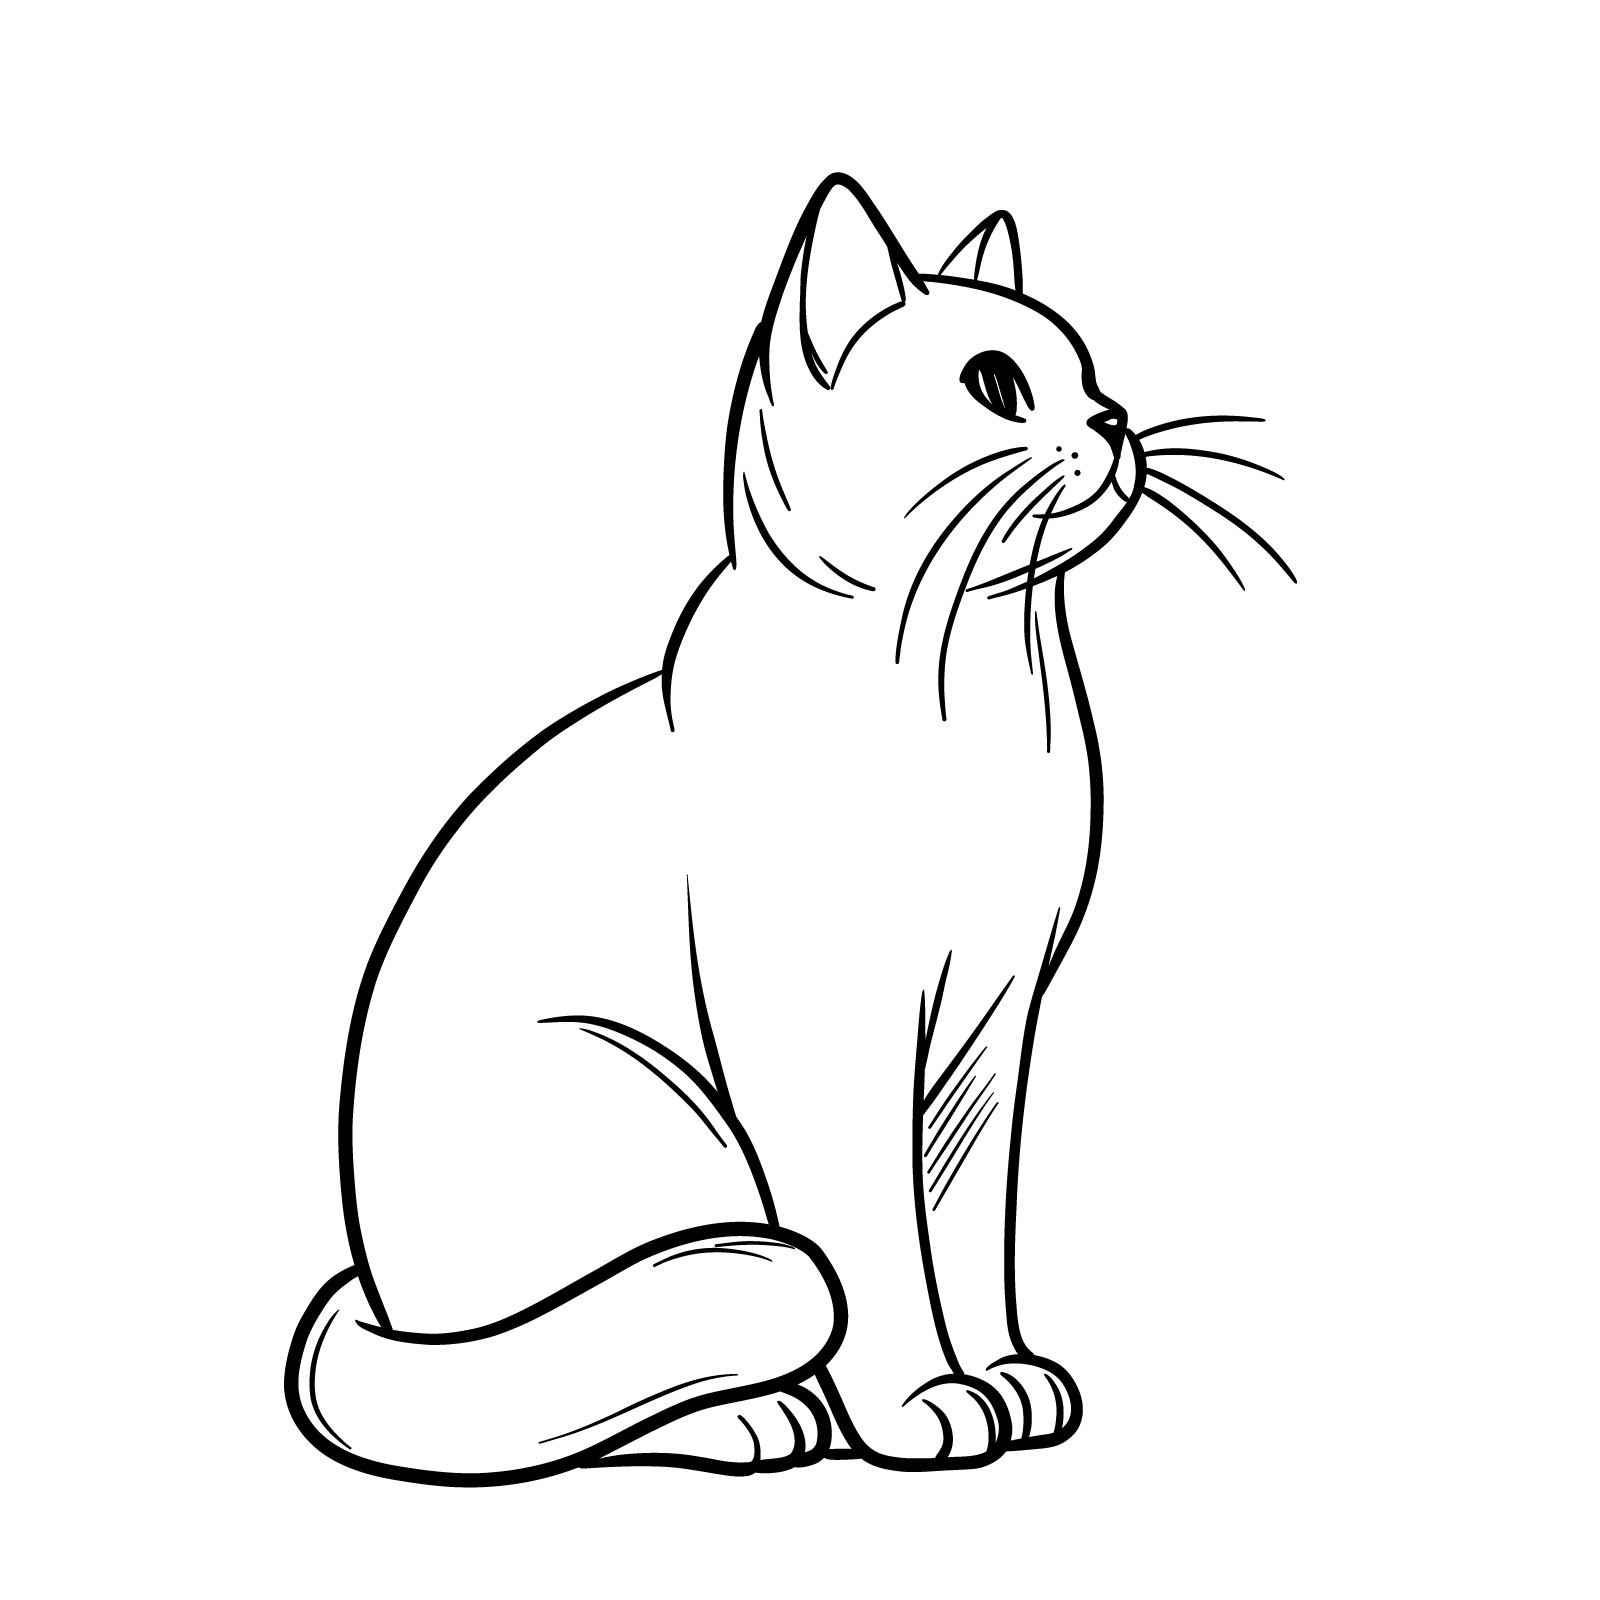 How to Draw a Sitting Cat - 3/4 Right Side View - Easy Drawing Guide